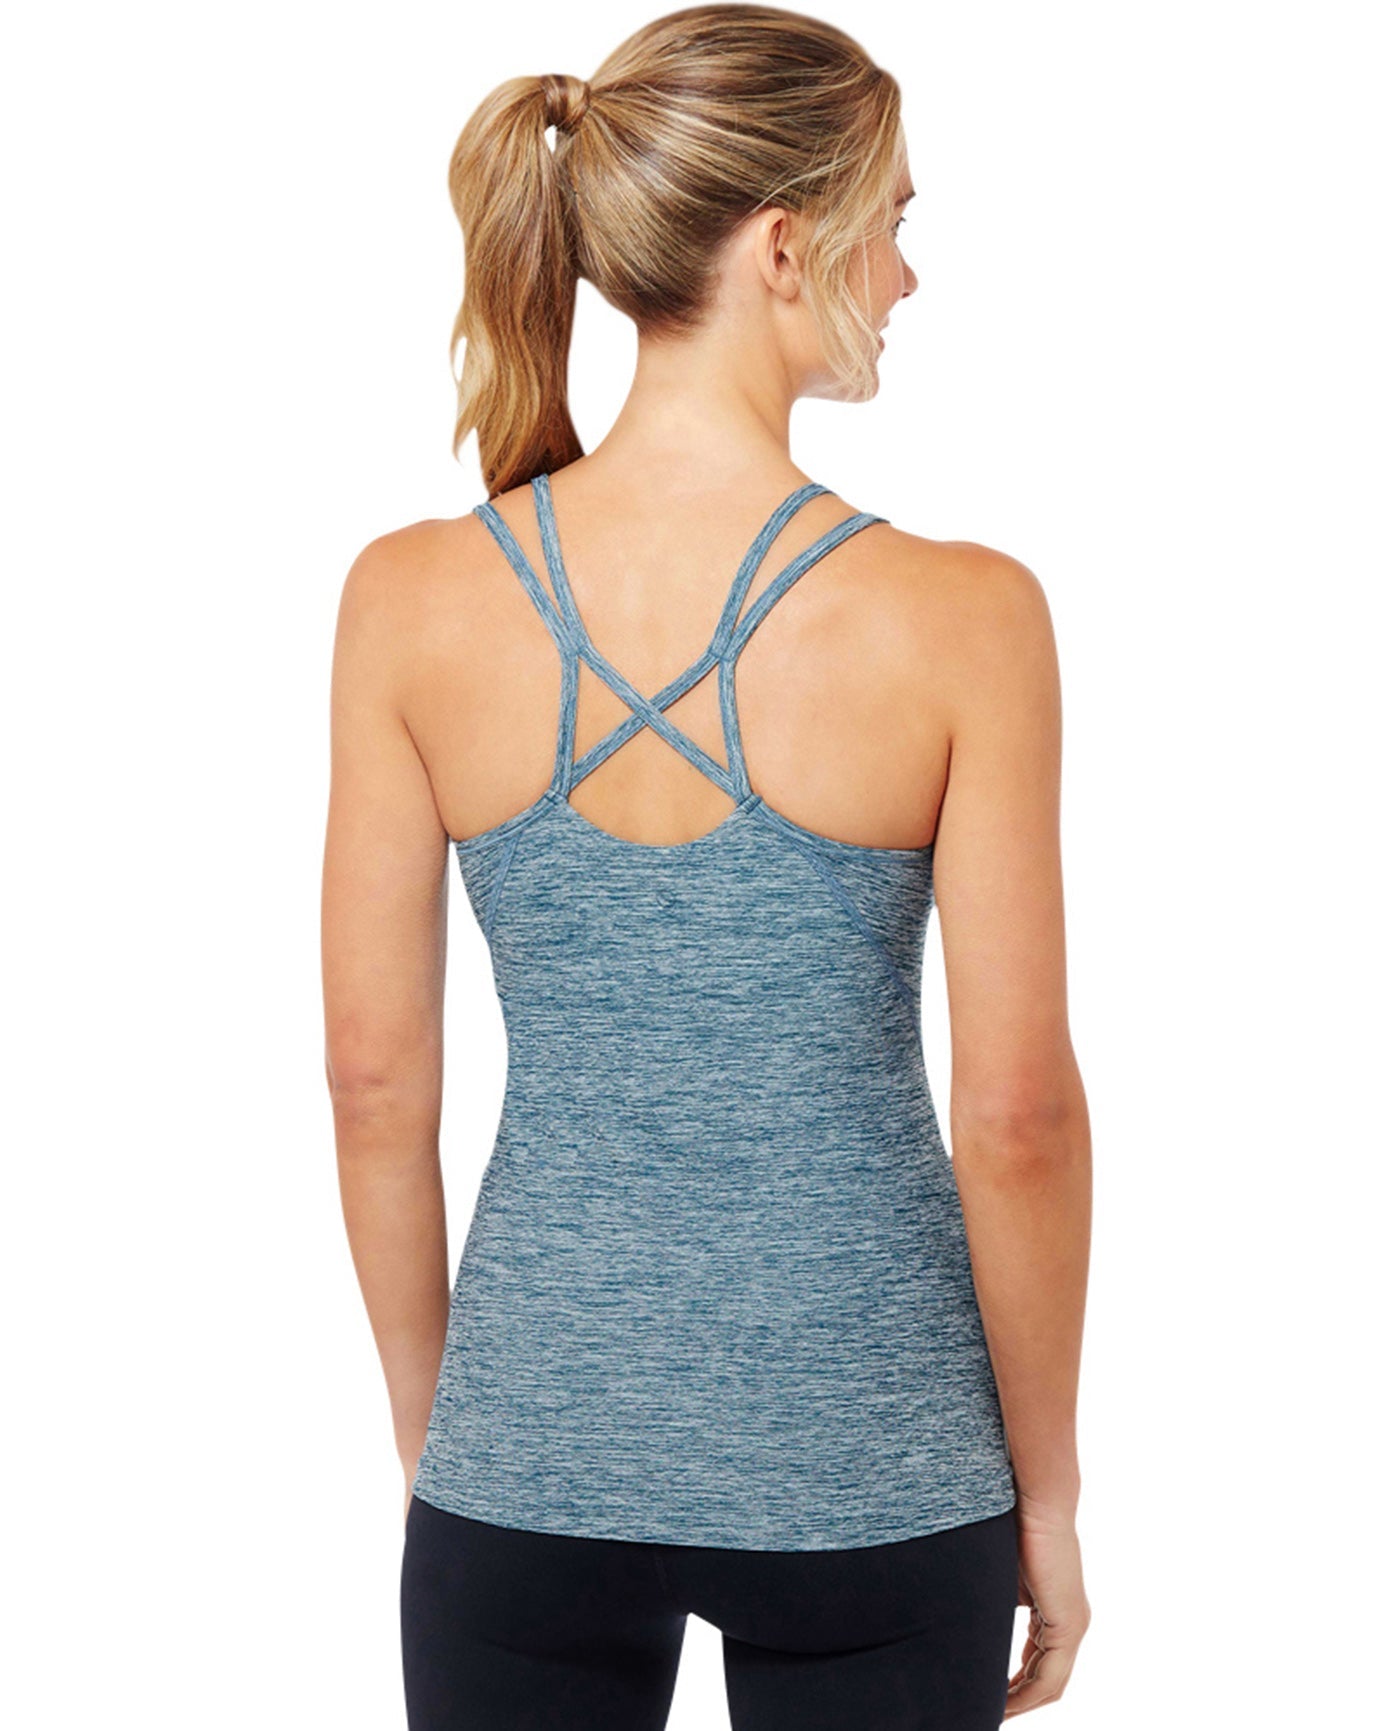 Back View Of Shape Blue Xx Tank Top with Built in Bra | SHA Reflecting Pond